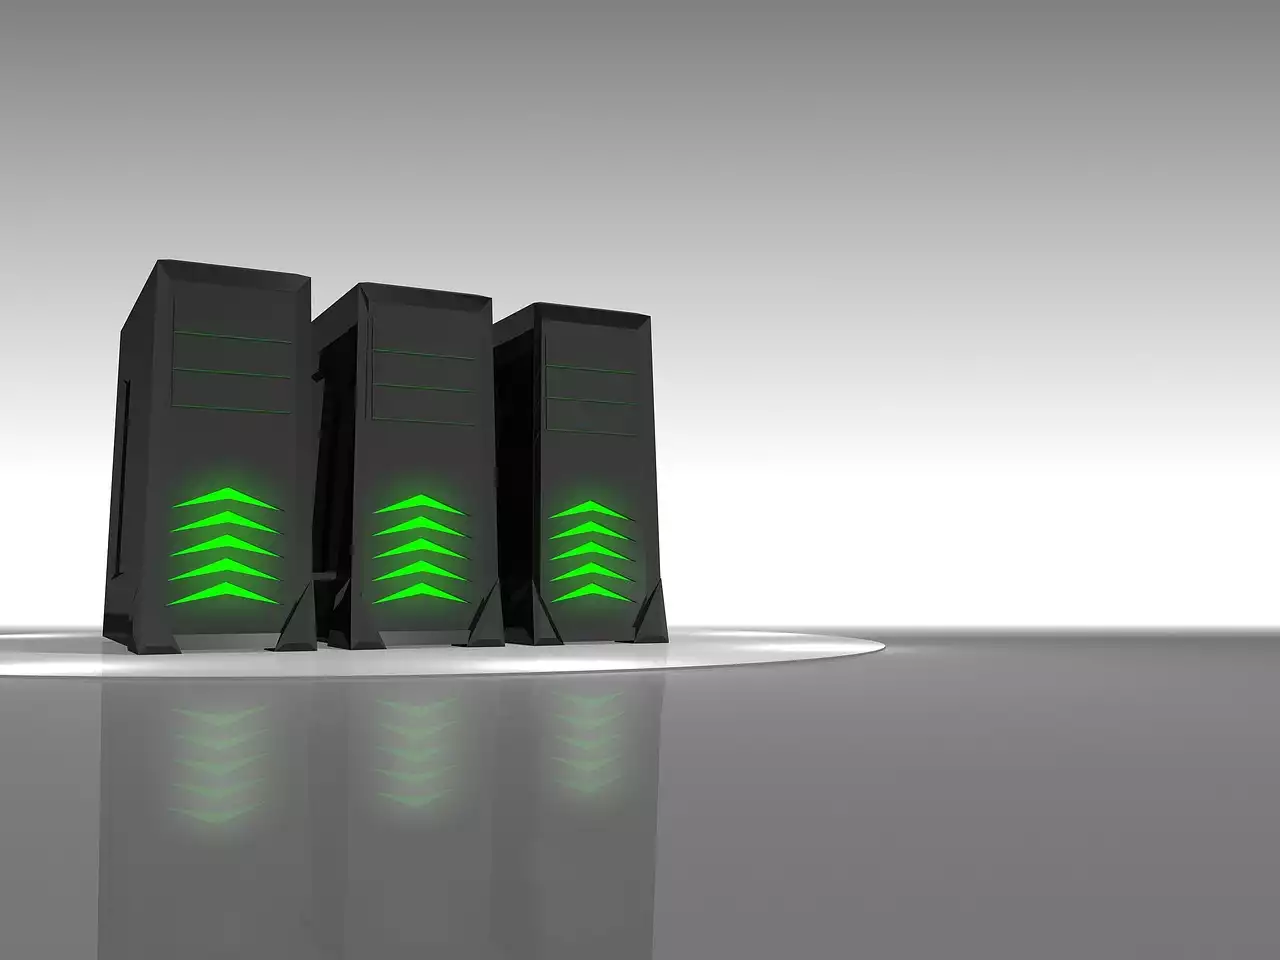 Top 5 Shared Hosting Providers in 2023